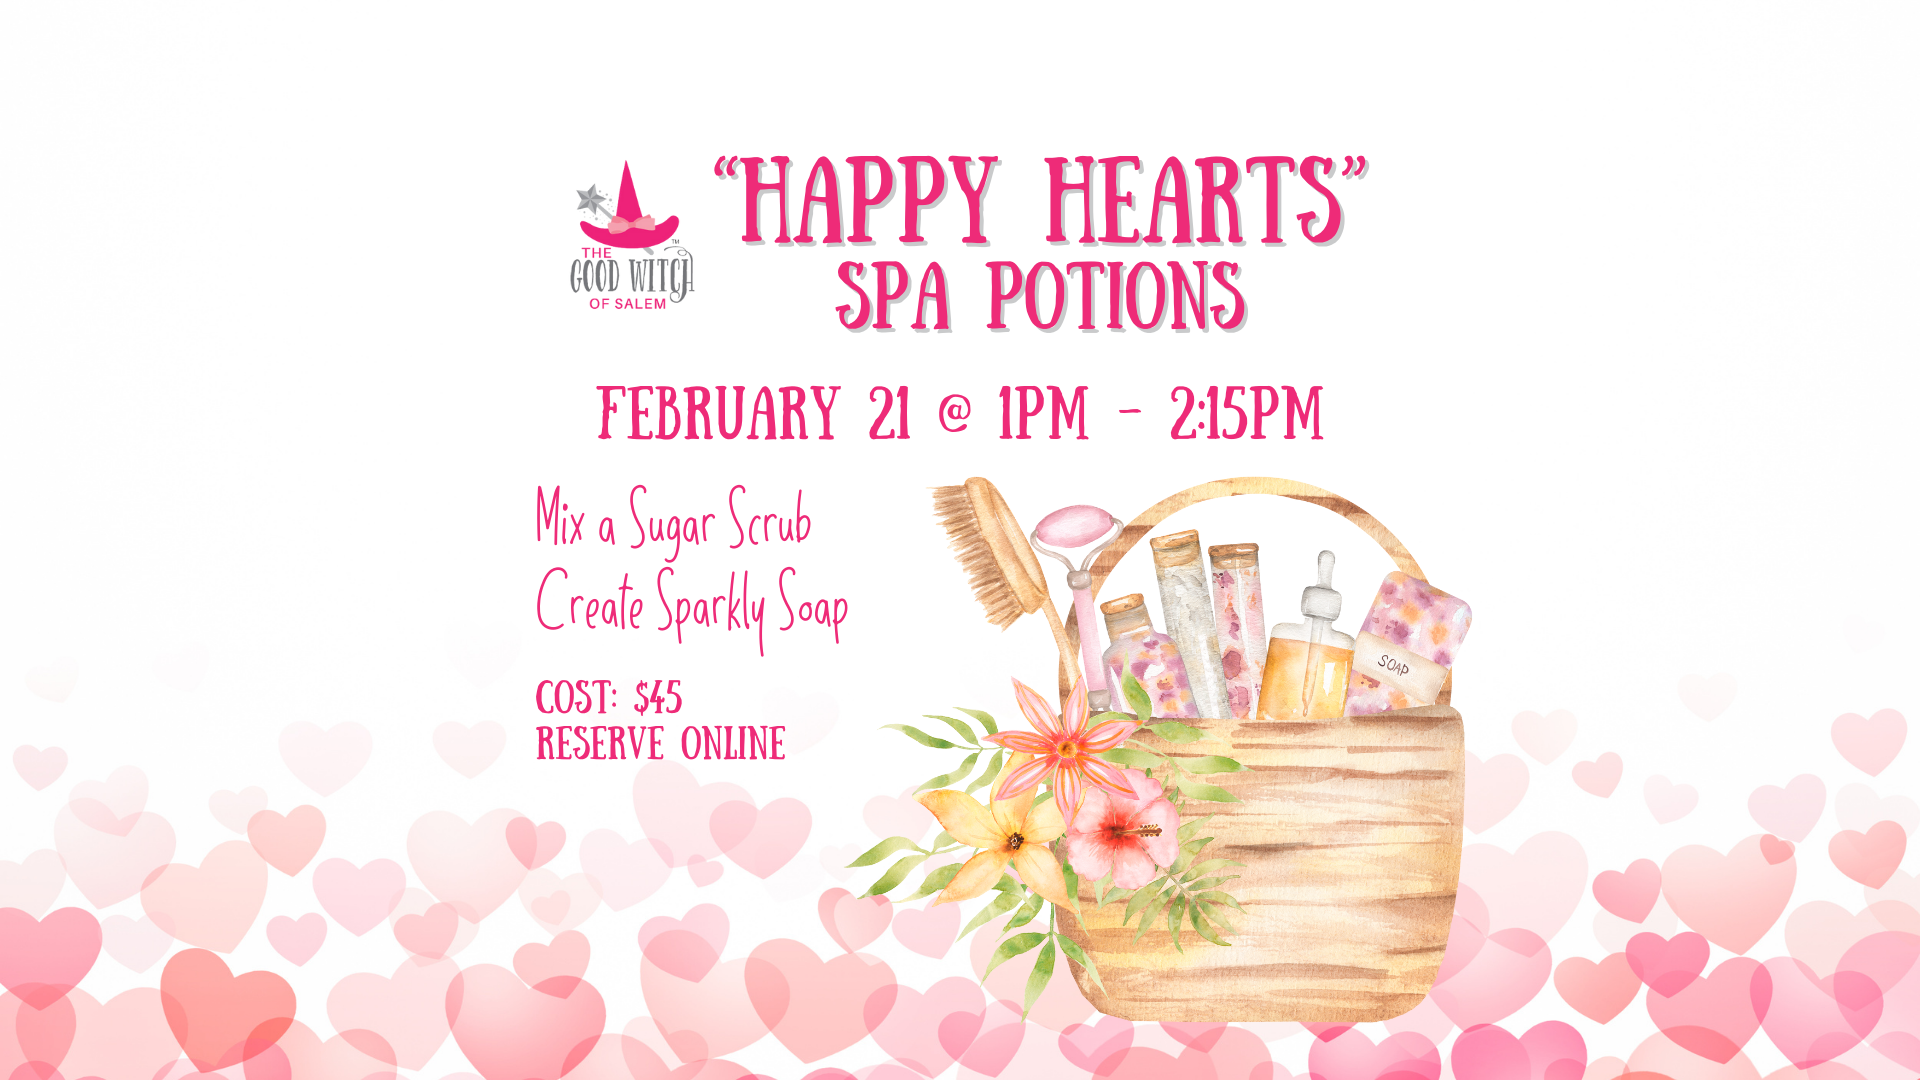 Wellness potion flyer for our delightful Happy Hearts Spa.